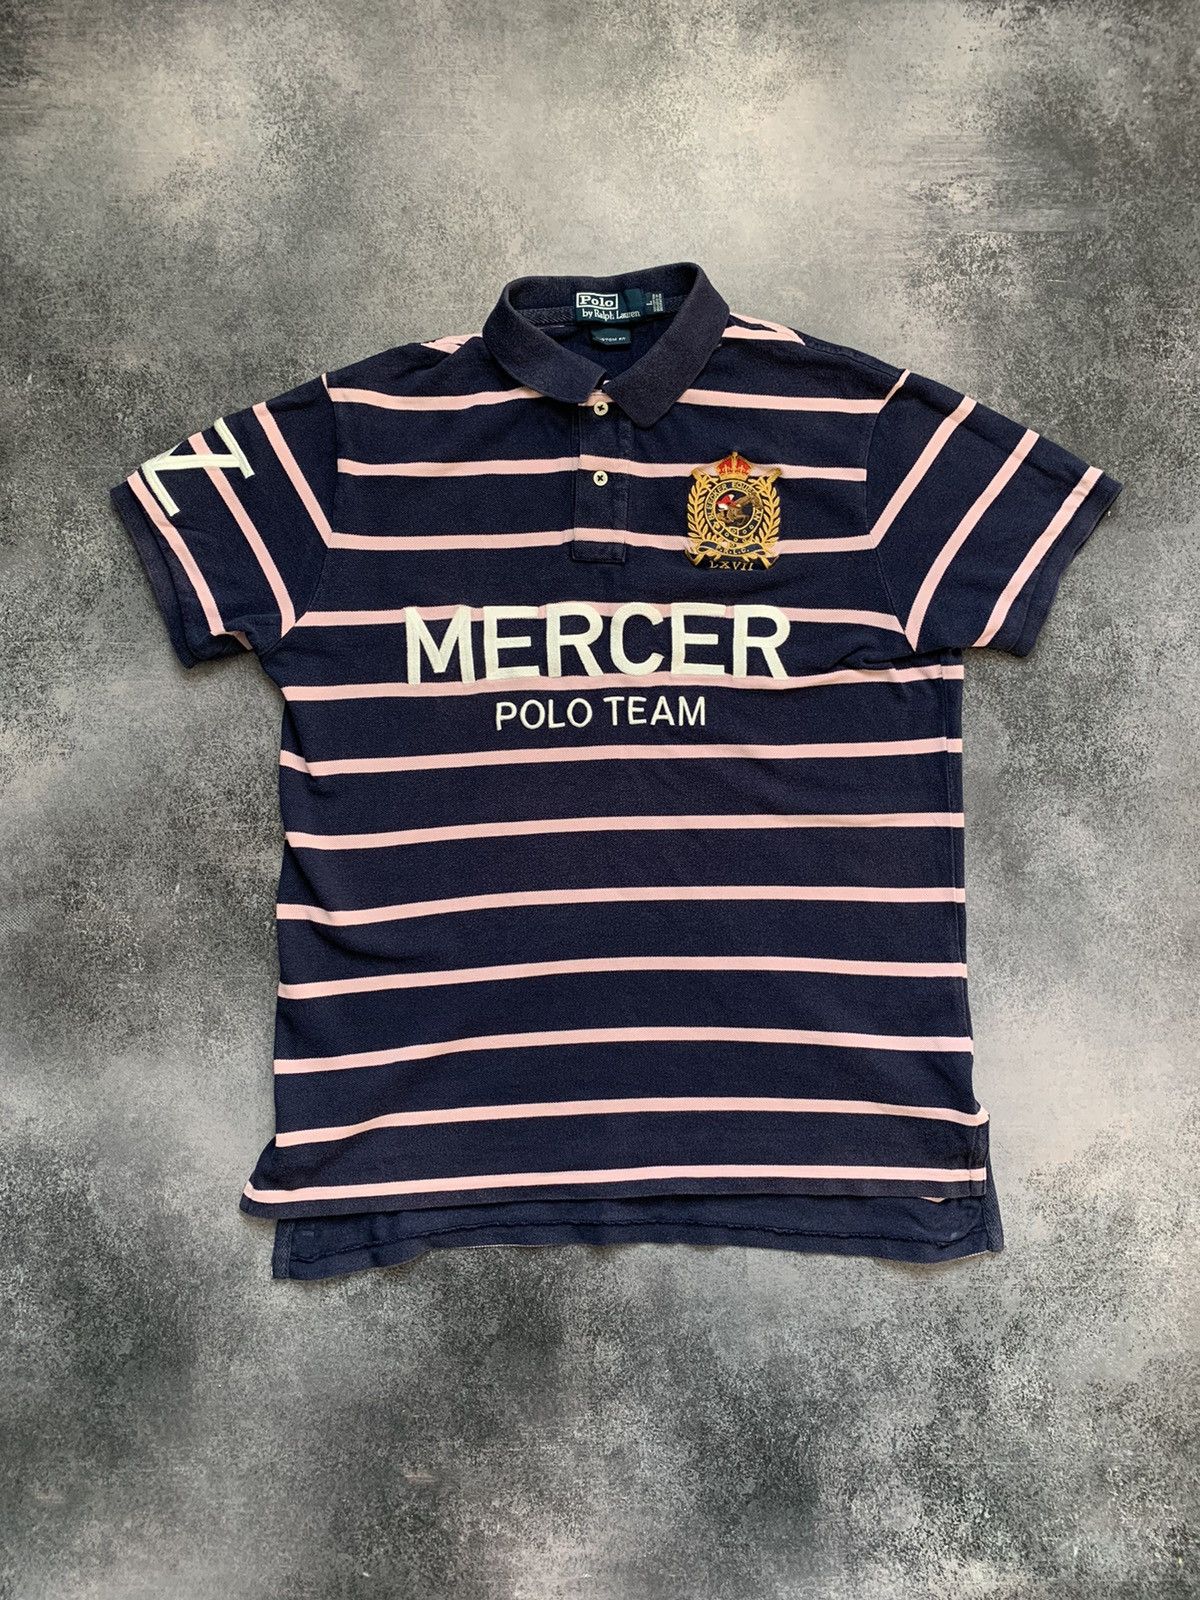 Pre-owned Polo Ralph Lauren X Vintage Polo Ralph Laurent Mercer Polo Team Iv Stripe Collar Tee In Navy